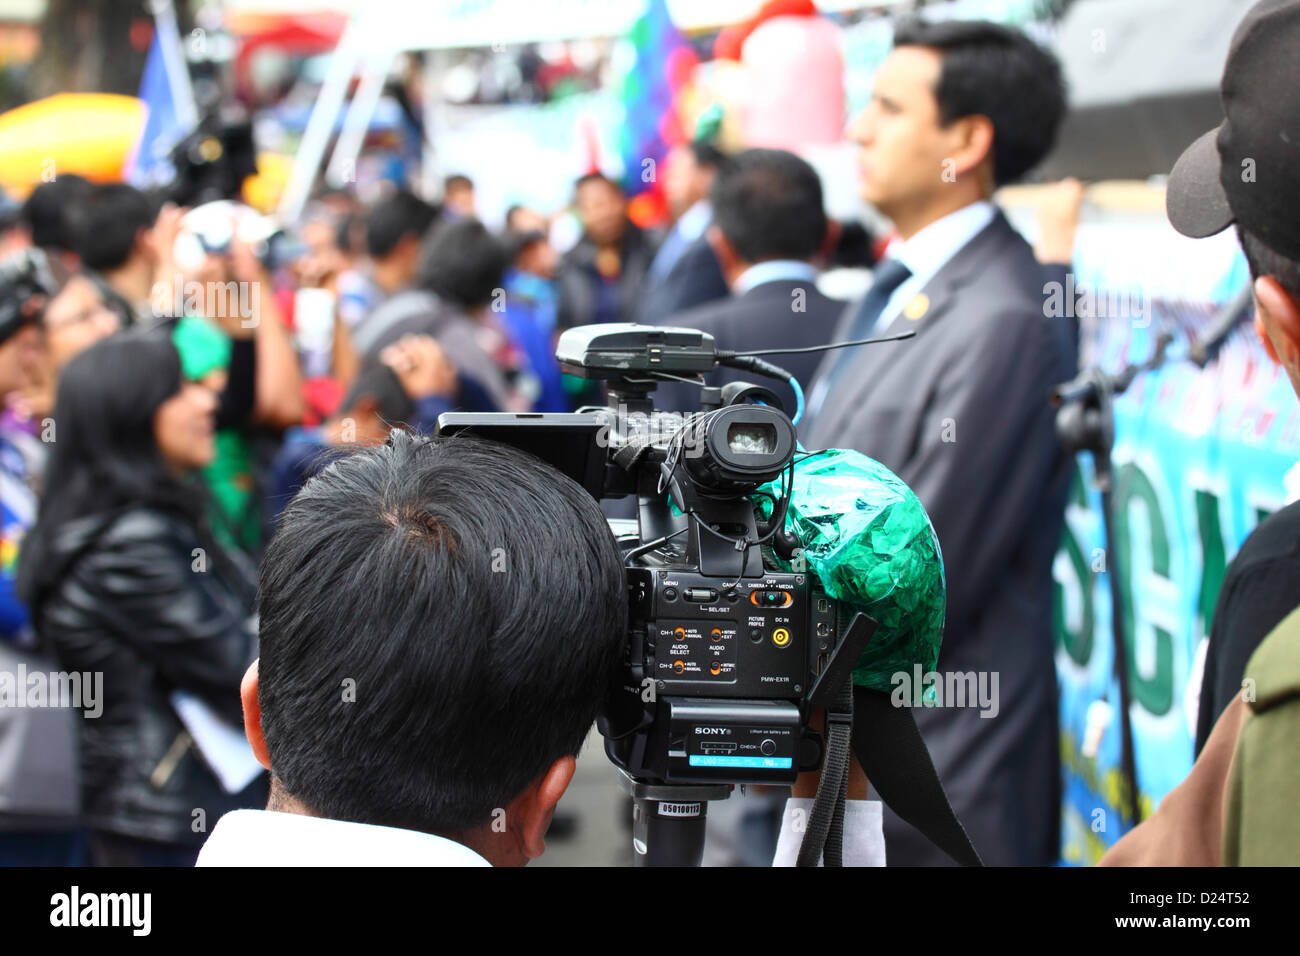 LA PAZ, BOLIVIA, 14th January. A bag of coca leaves hangs on a TV camera while the camerman covers an event to celebrate Bolivia rejoining the 1961 UN Single Convention on Narcotic Drugs. Bolivia formally withdrew from the Convention in 2011 and had been campaigning for clauses banning traditional uses of the coca leaf to be removed. By the 11th January 2013 deadline only 15 countries (less than the 62 required to block the proposal) had registered an objection to Bolivia rejoining the Convention with special dispensations. Stock Photo